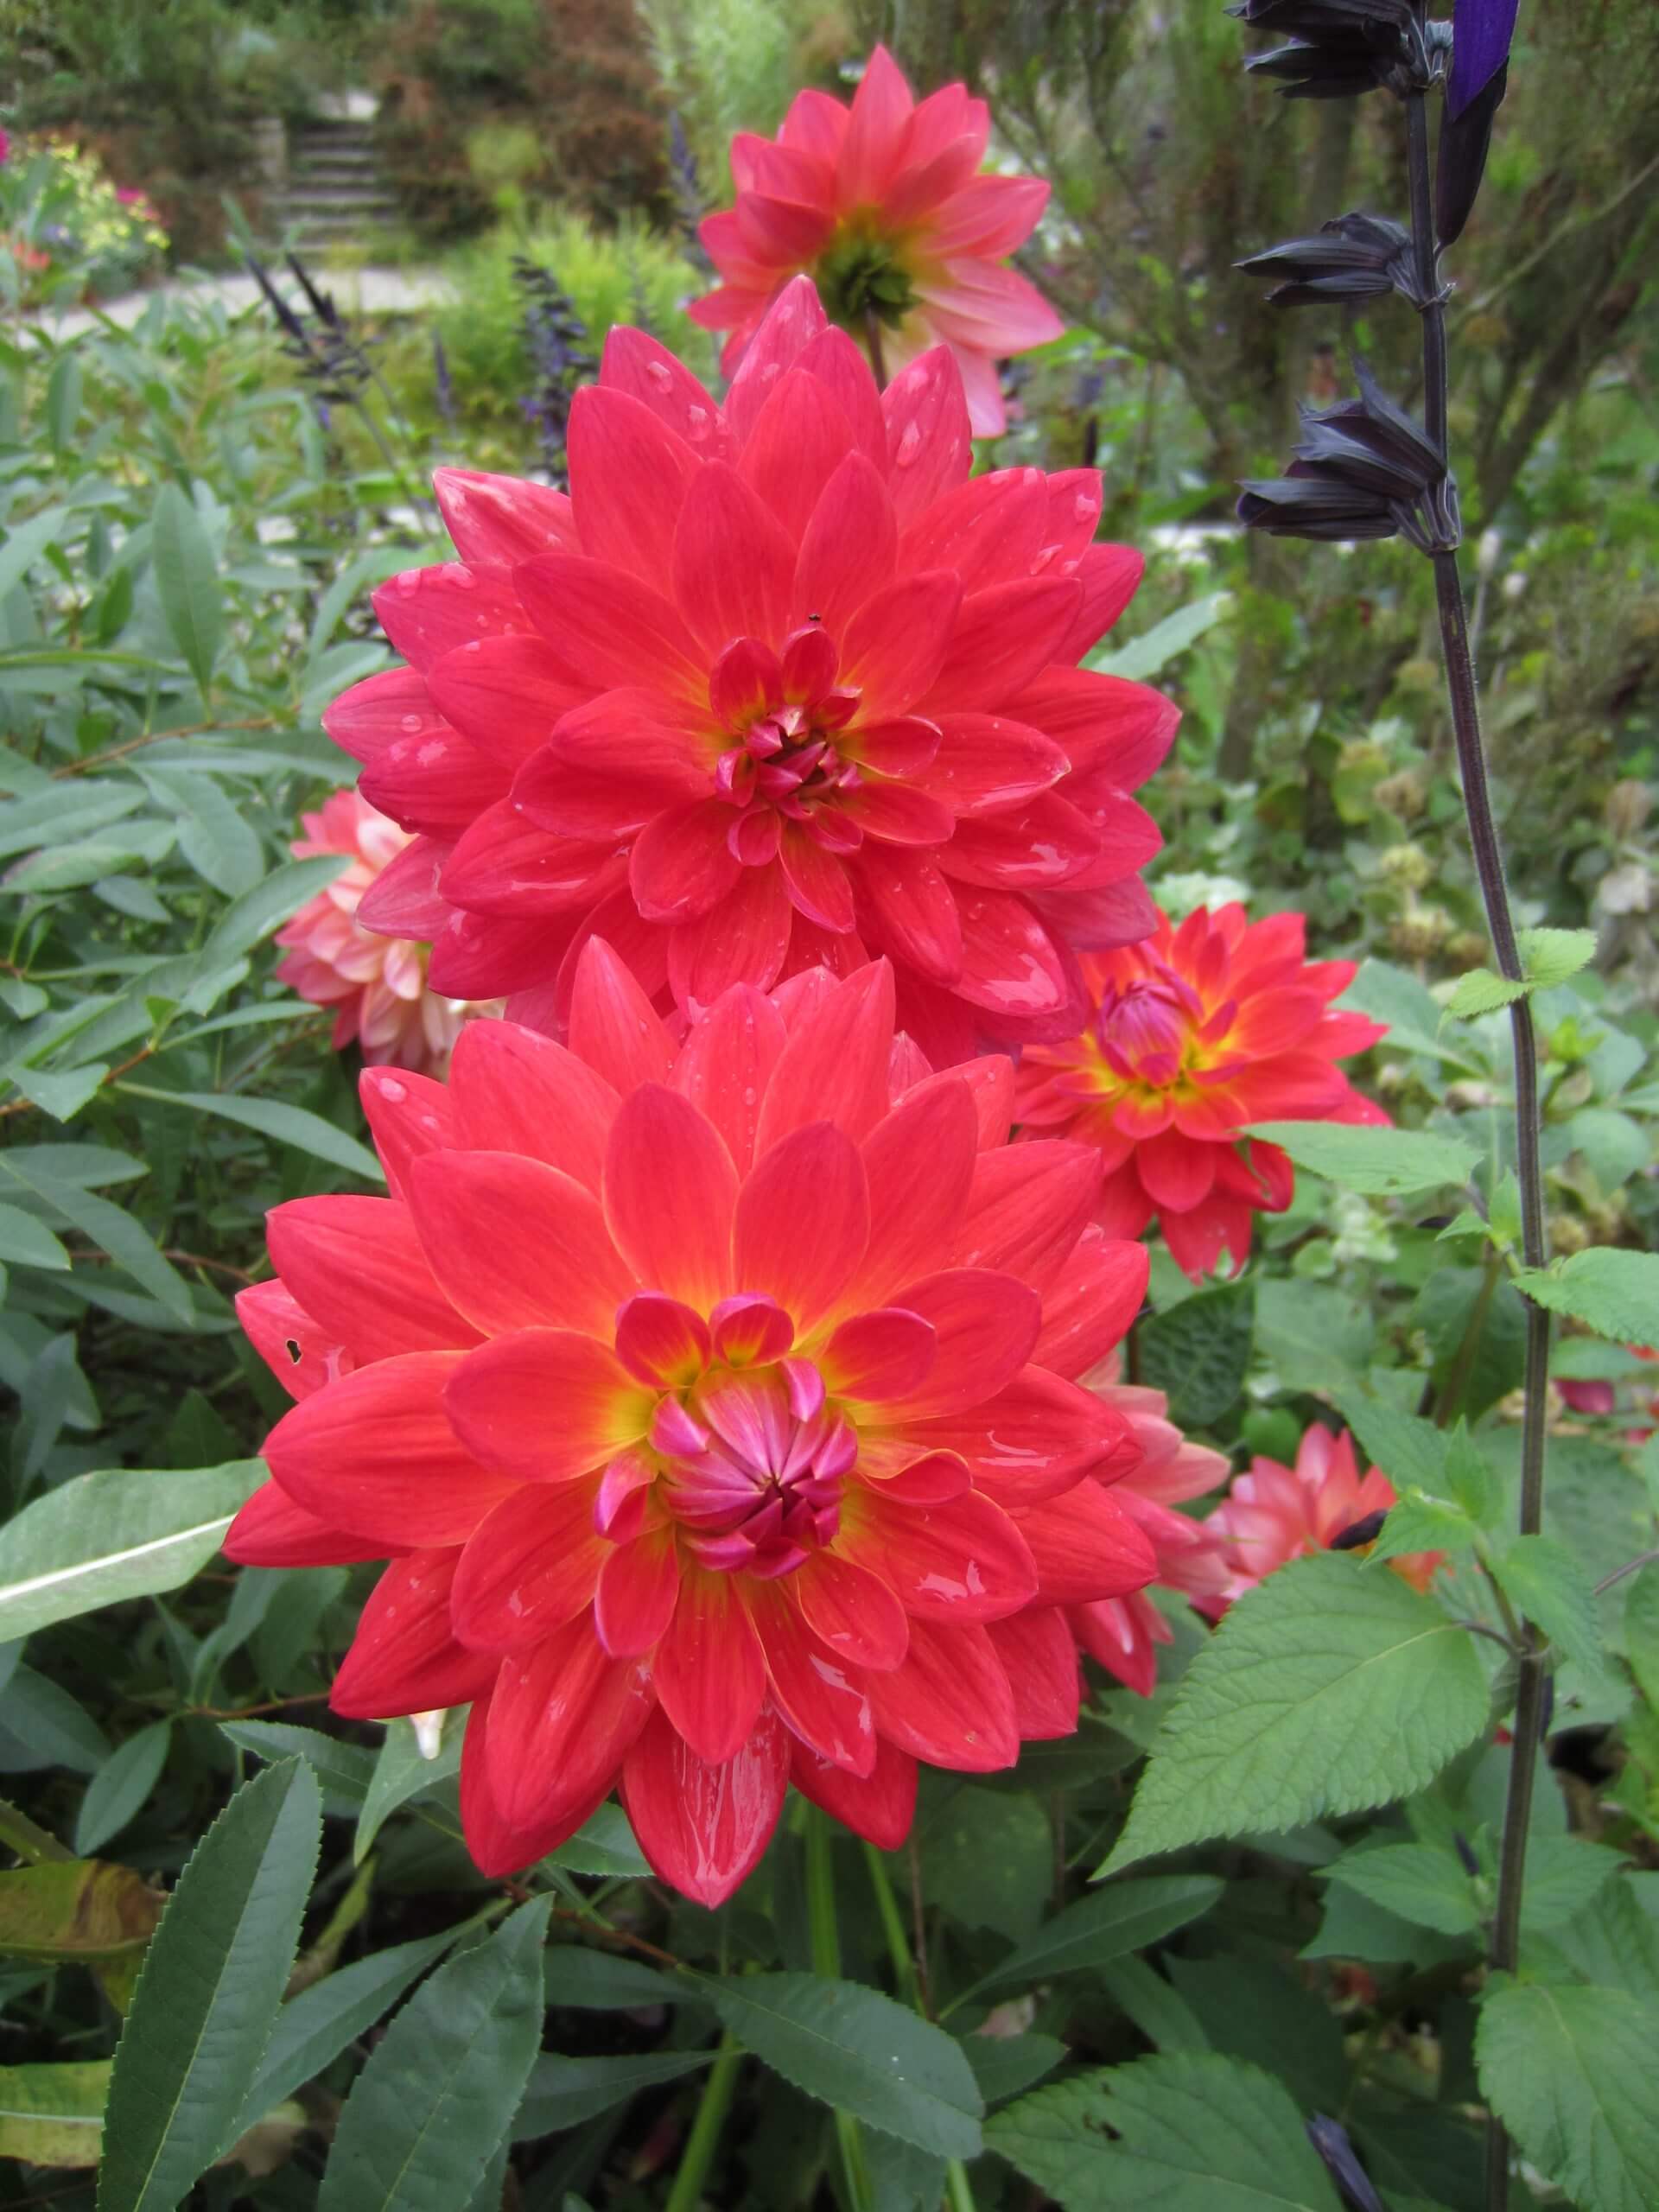 Dinner plate dahlias are popular in cooler elevations of the South.